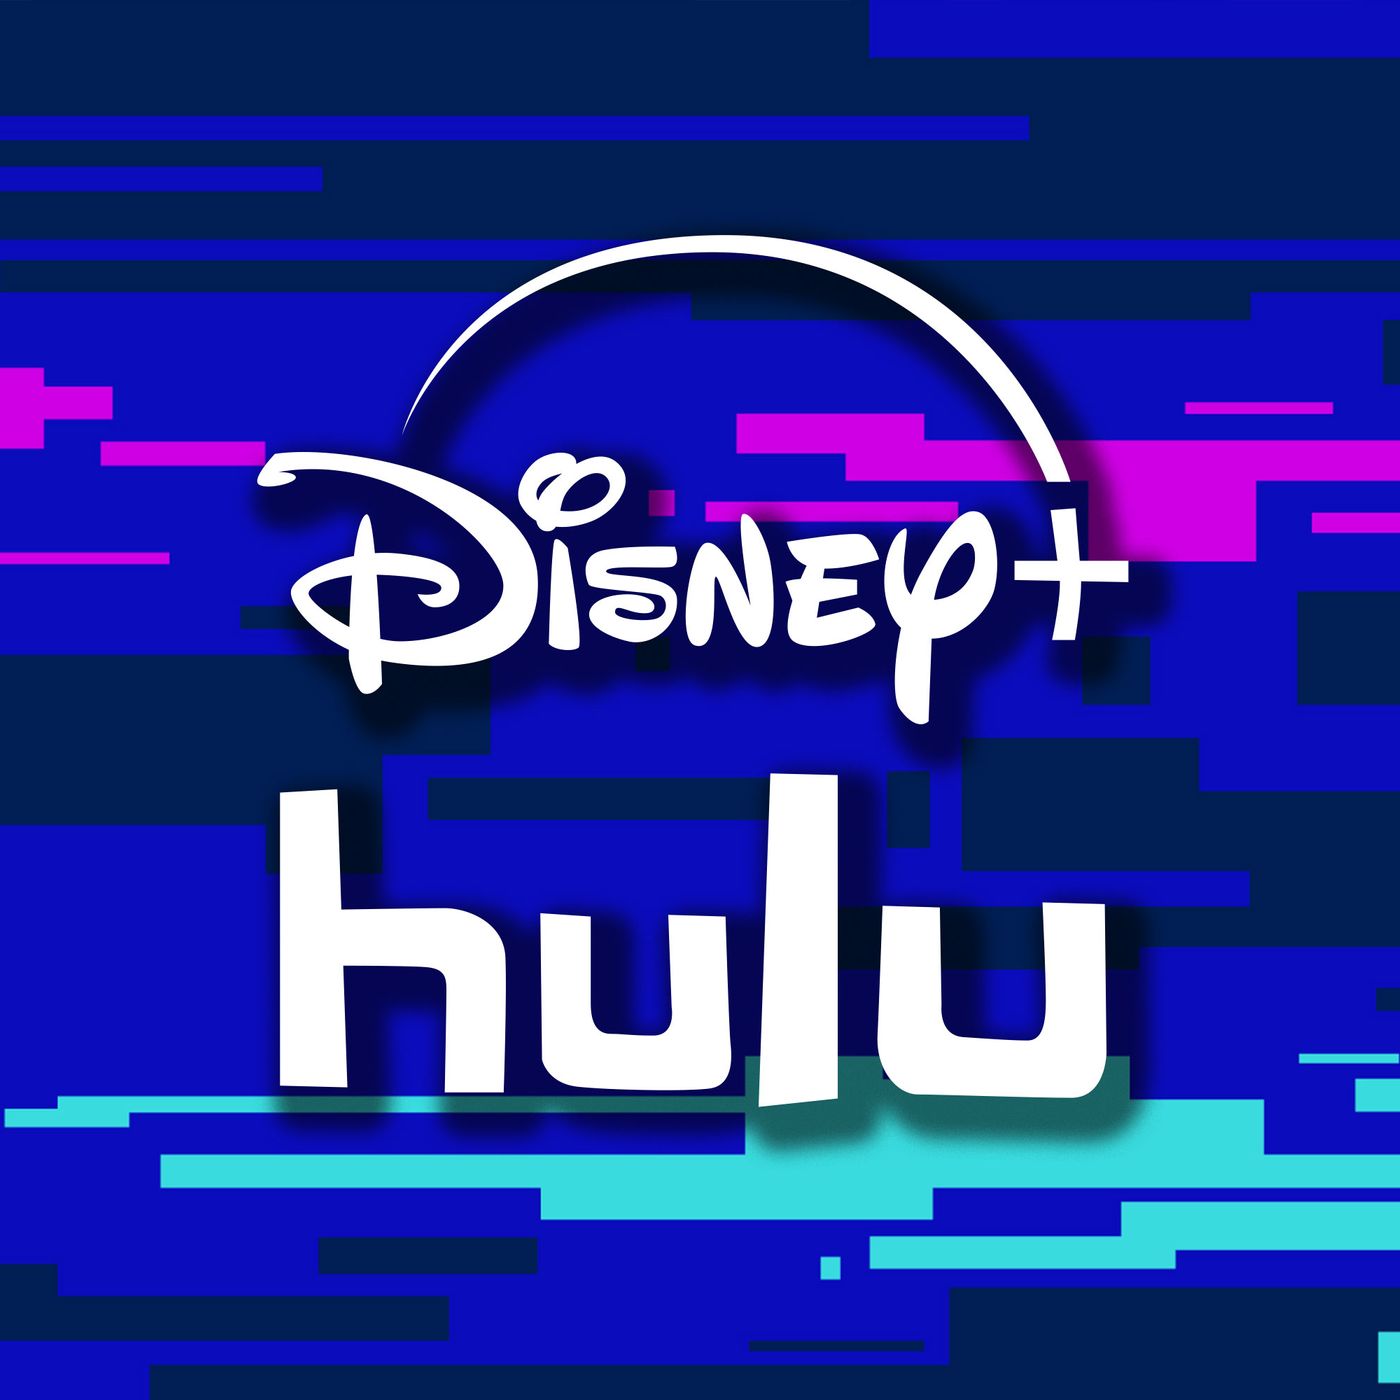 Disney+ and Hulu Are Merging: All Your Questions Answered